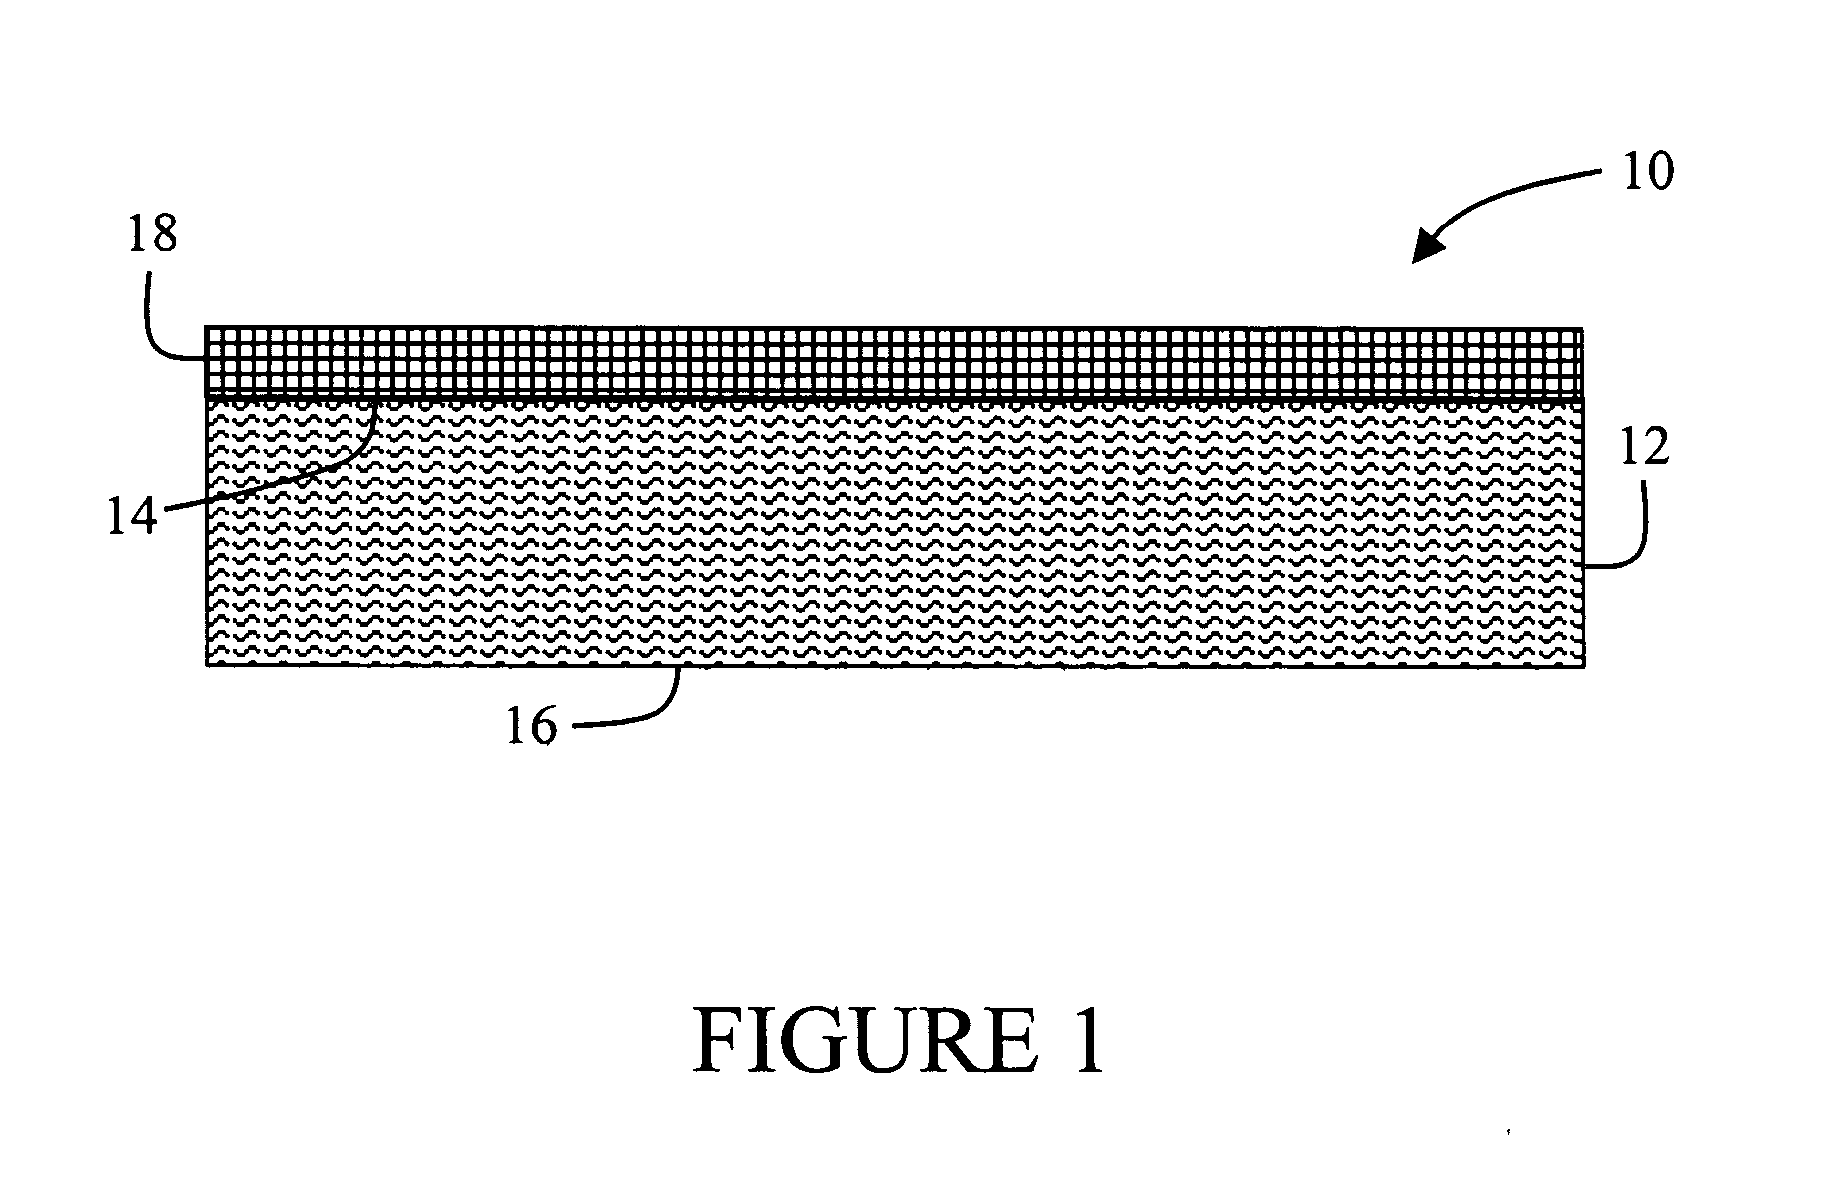 Composite thermoplastic sheets including natural fibers